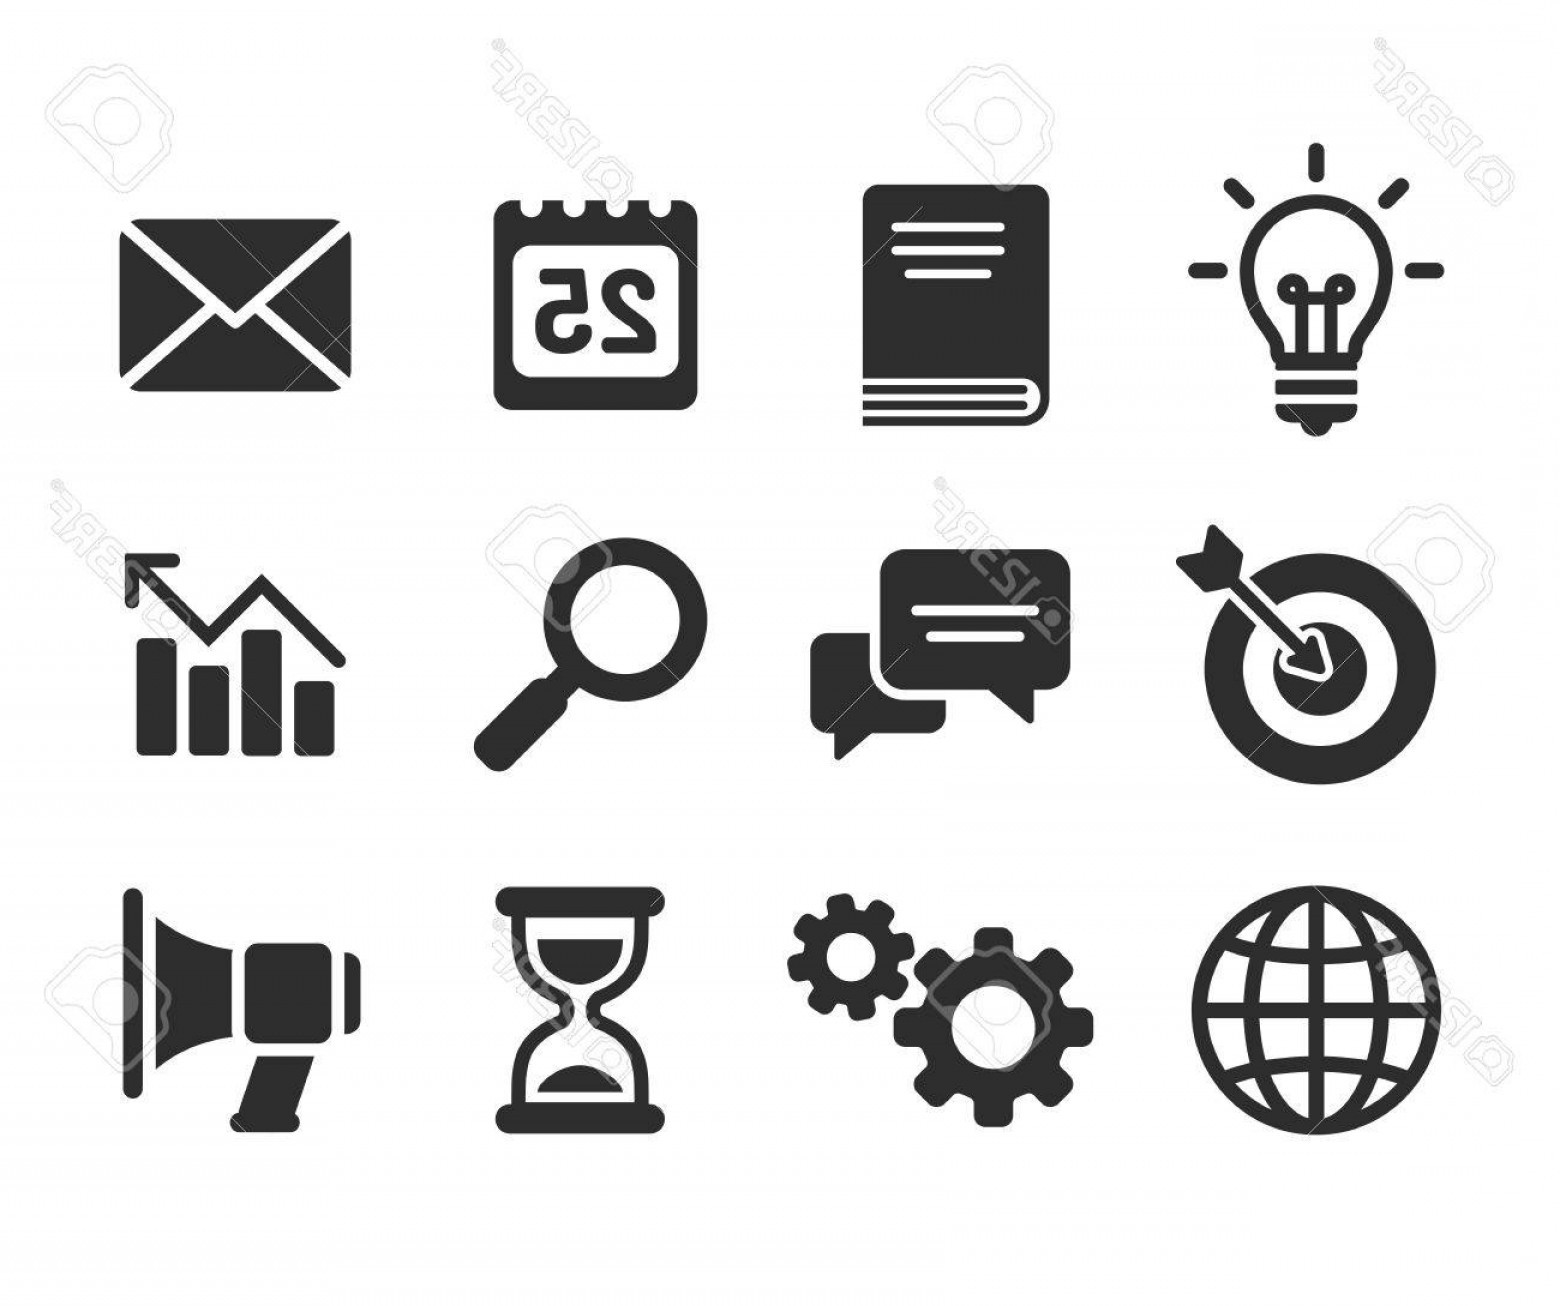 Free Vector Business Icon Set SHOPATCLOTH